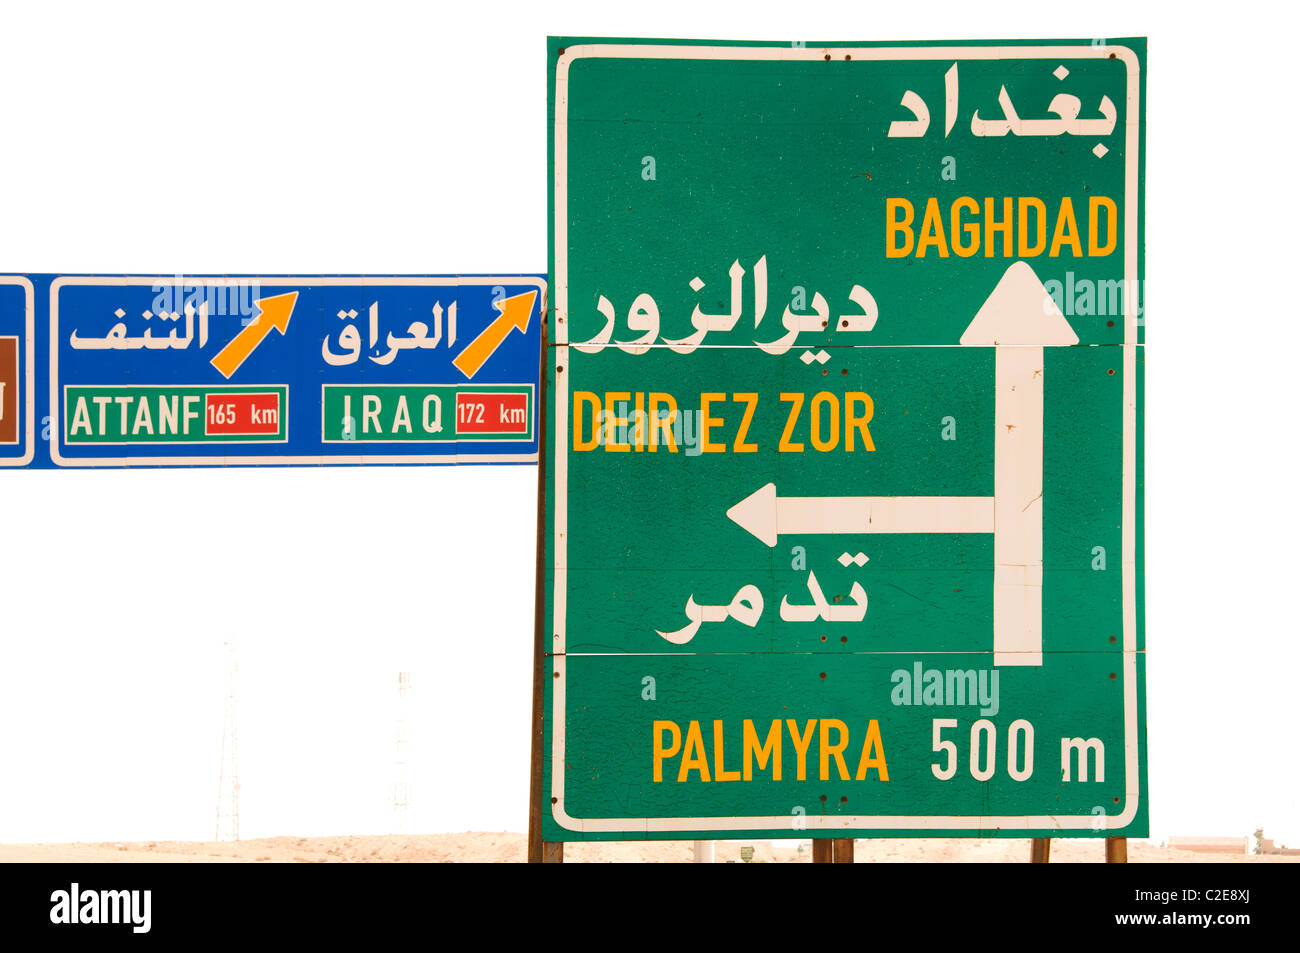 Damas Syrie Iraq Attane Road traffic Sign truck Banque D'Images